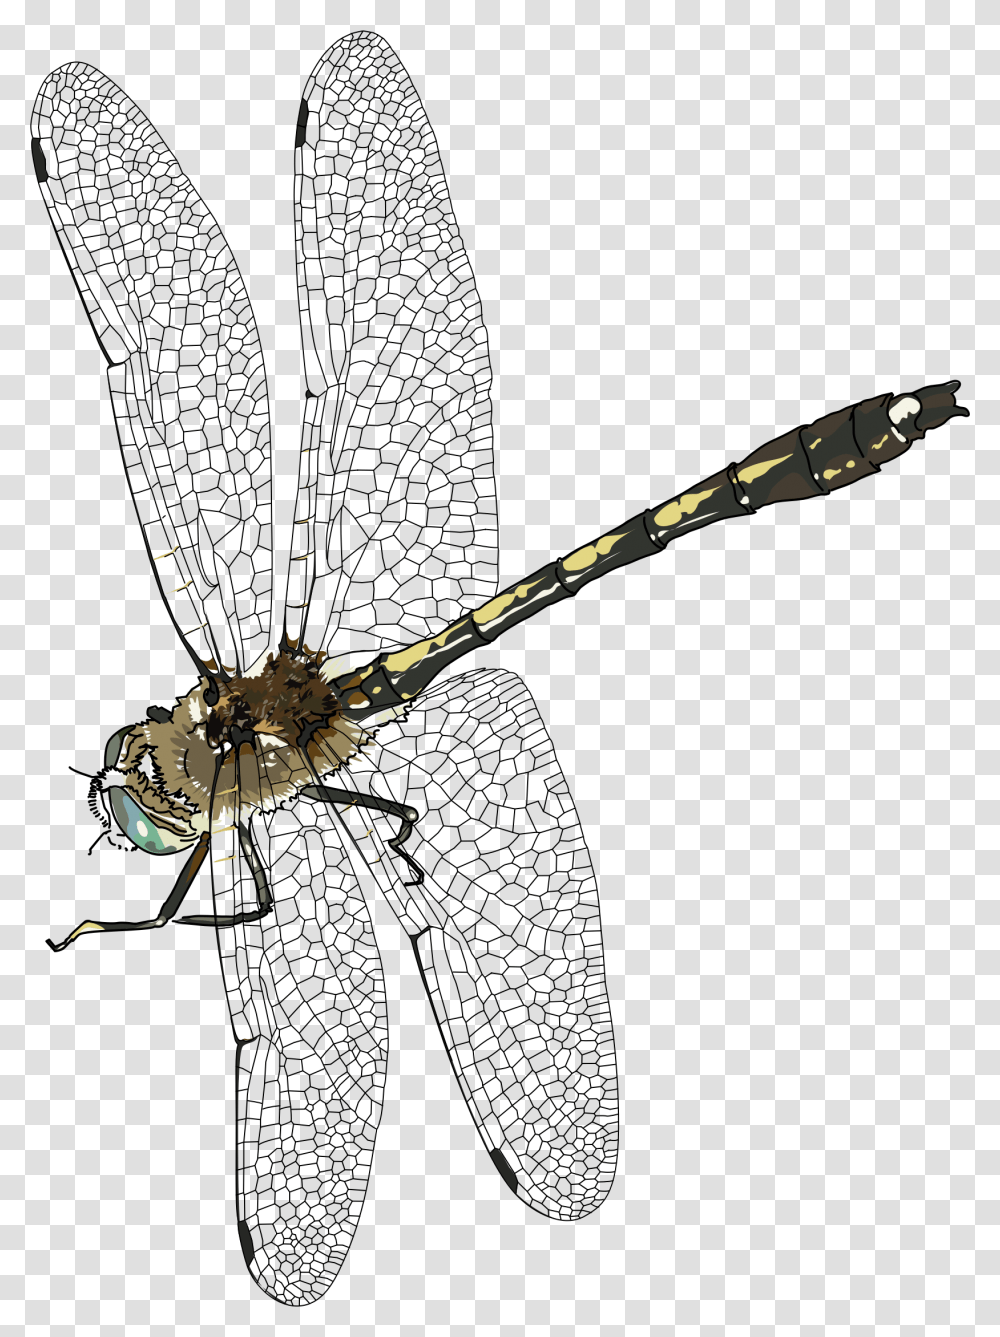 Download Dragonfly Background Dragonfly, Animal, Bow, Invertebrate, Insect Transparent Png